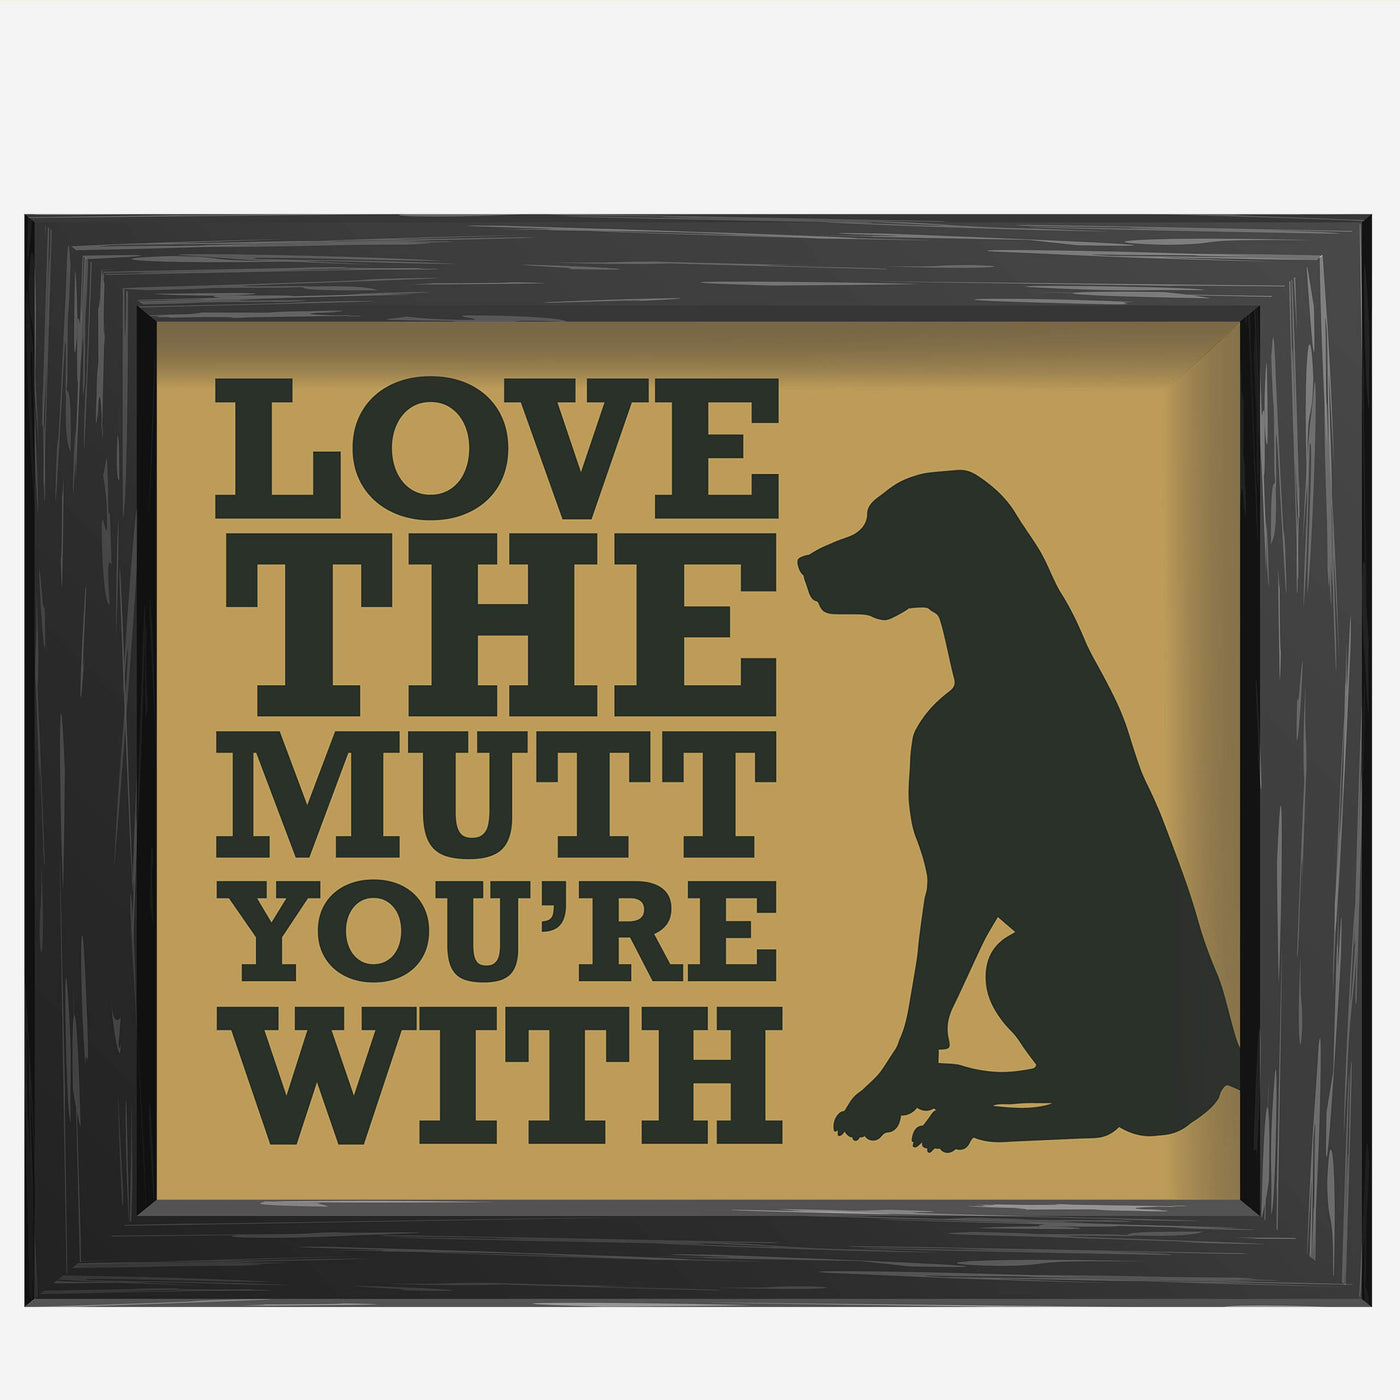 Love The Mutt You're With Funny Dog Sign -10 x 8" Wall Art Print-Ready to Frame. Humorous Rustic Art Print for Home-Kitchen-Vet's Office Decor. Great Welcome Sign and Gift for All Dog Lovers!